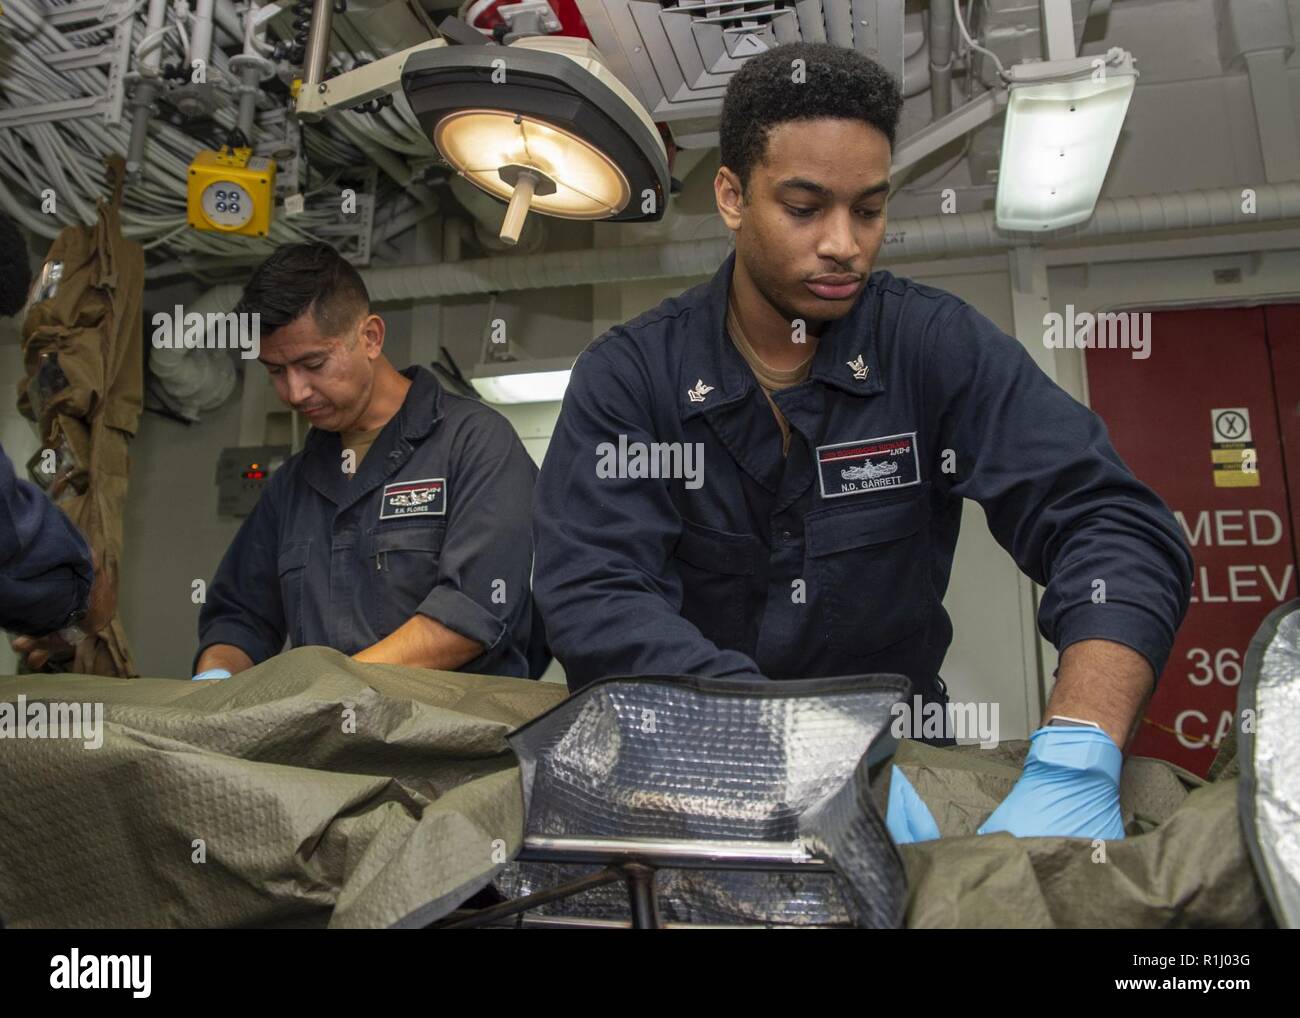 PACIFIC OCEAN (Sept. 21, 2018) Hospital Corpsman 2nd Class Nathaniel Garrett, right, from St. Louis, and Hospitalman Emmanuel Flores, from Chicago, treat a simulated casualty during a mass casualty drill in the medical triage room of the amphibious assault ship USS Bonhomme Richard (LHD 6). Bonhomme Richard is currently underway in the U.S. 3rd Fleet area of operations. Stock Photo